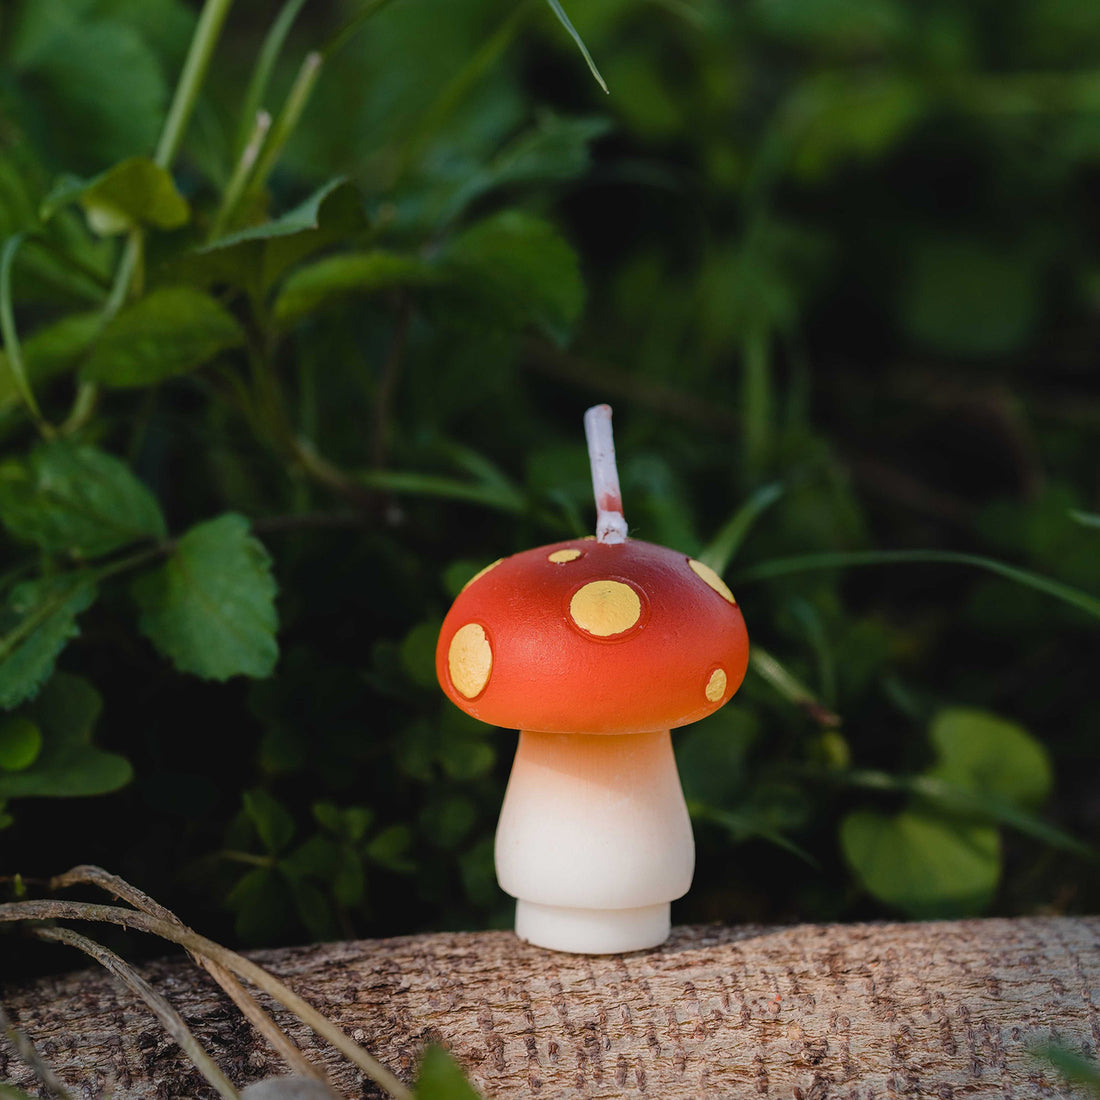 Meet the new Mini Mushroom Candle that will light up your nights.